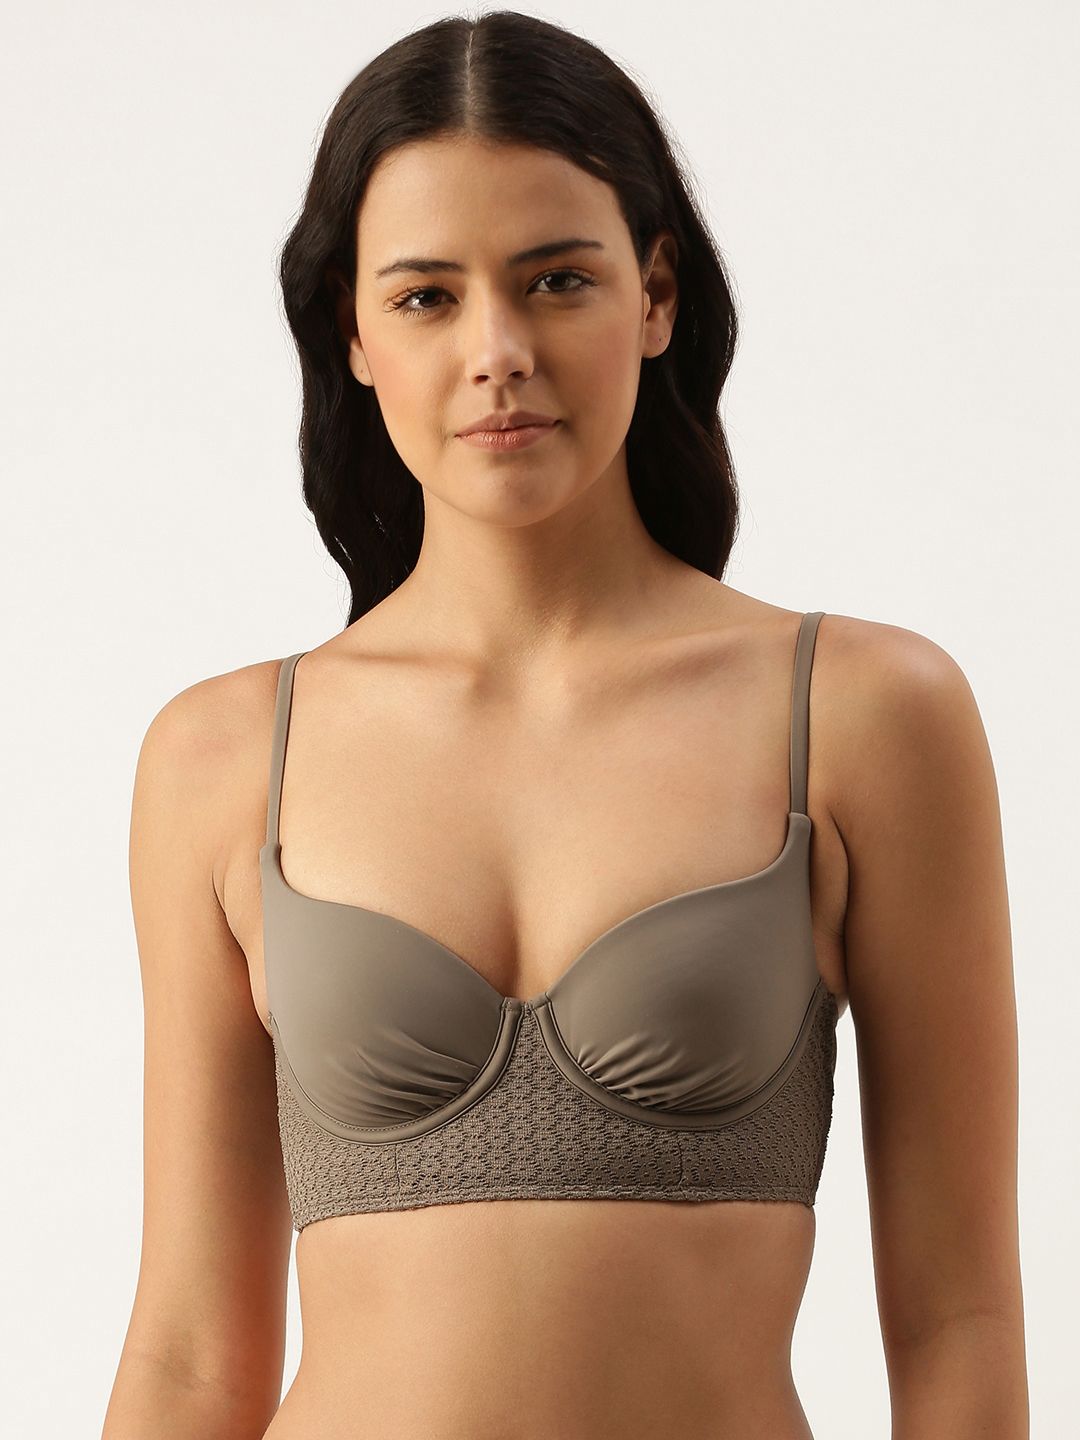 Amante Grey Solid Long Line Padded Bandeau Swim Top With Stylish Back Detail SWT17617 Price in India